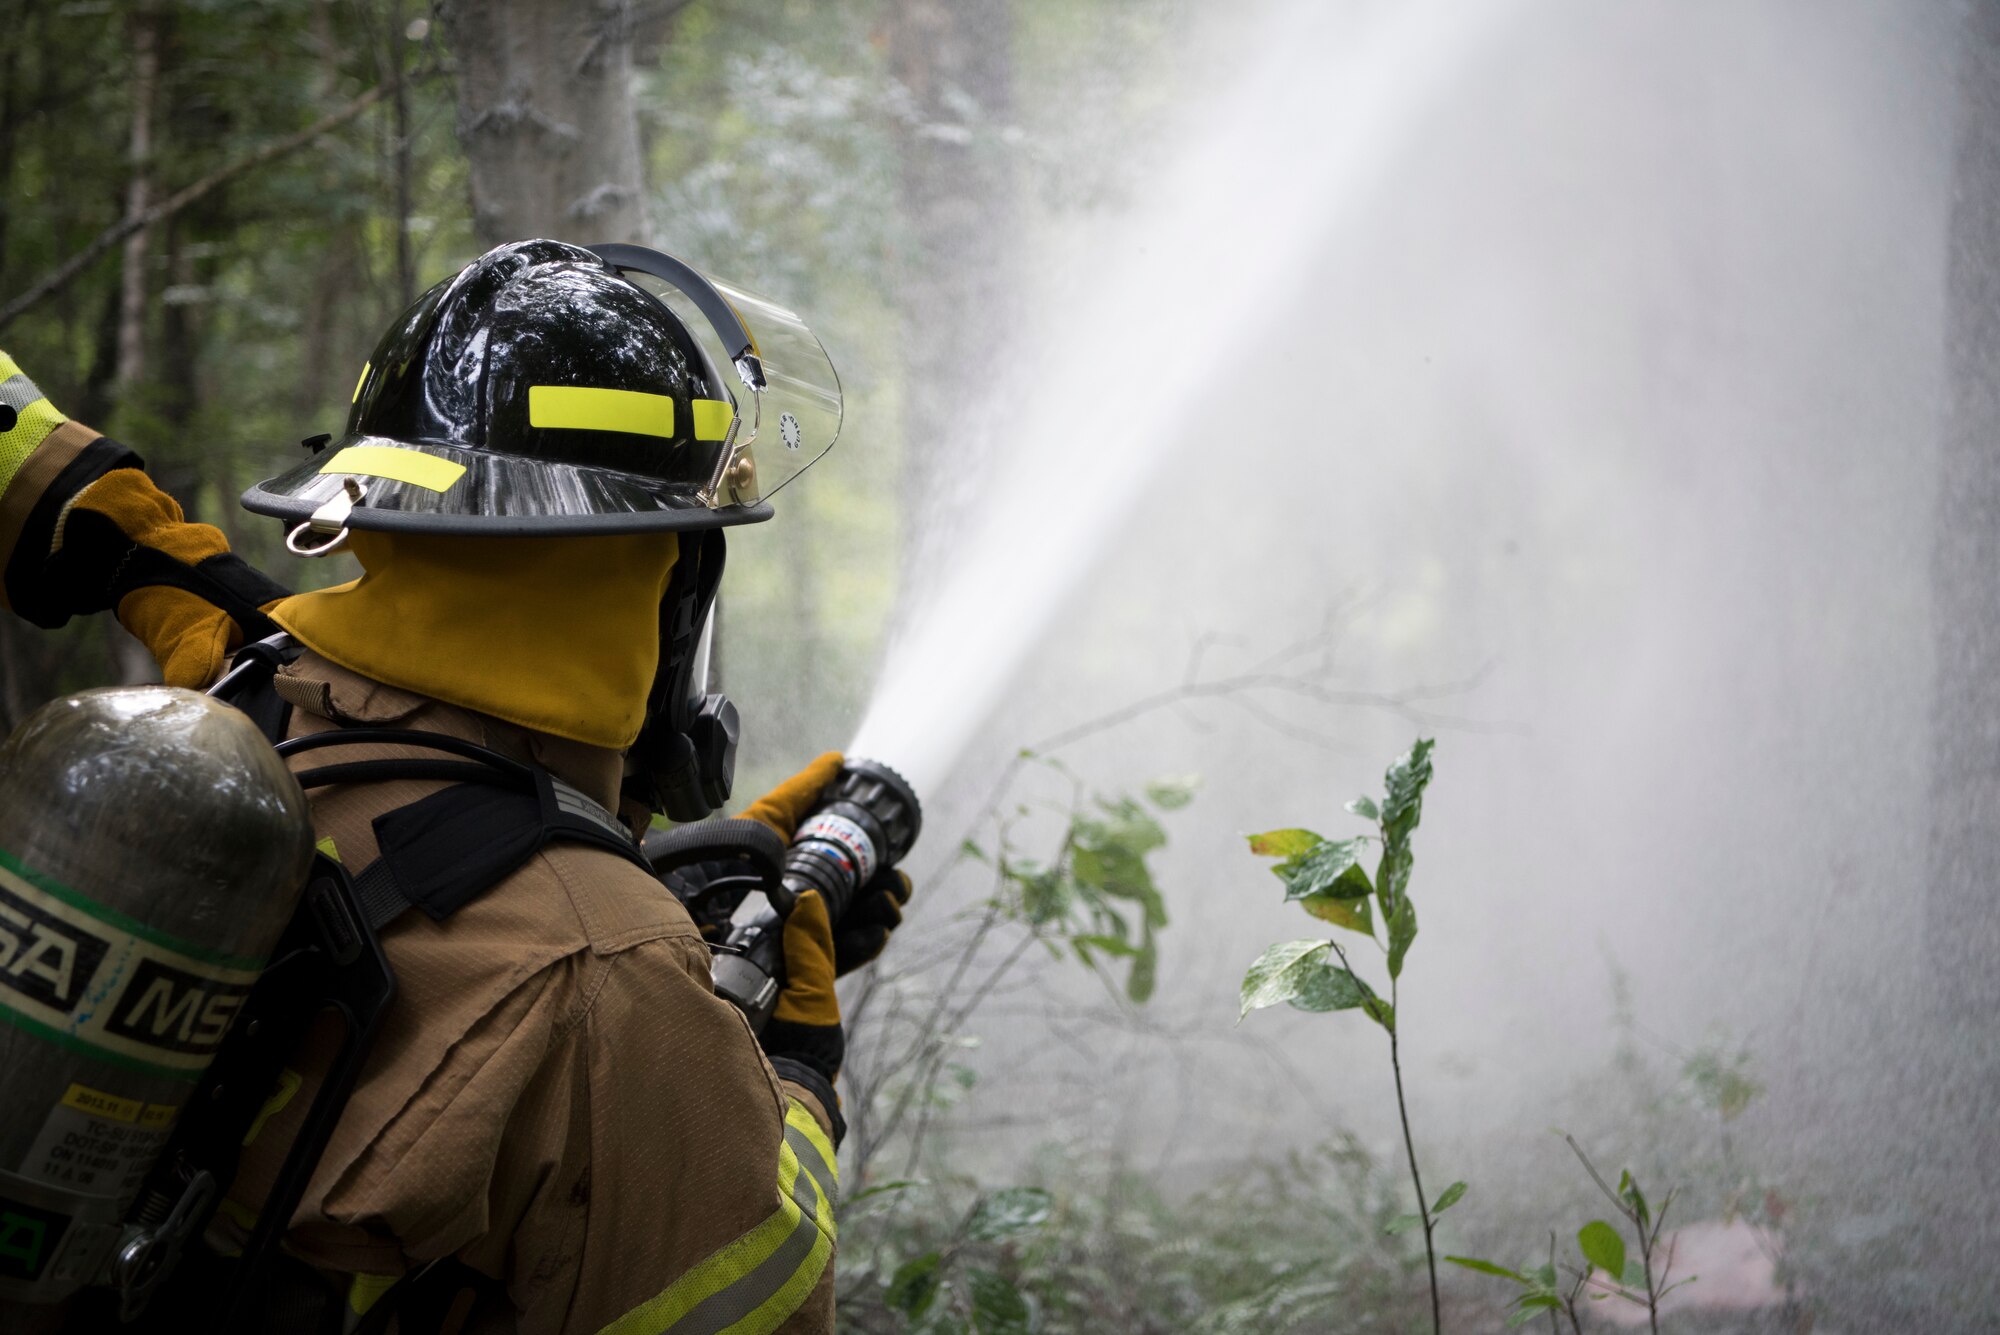 Firefighter sprays water onto simulated aircraft crash.